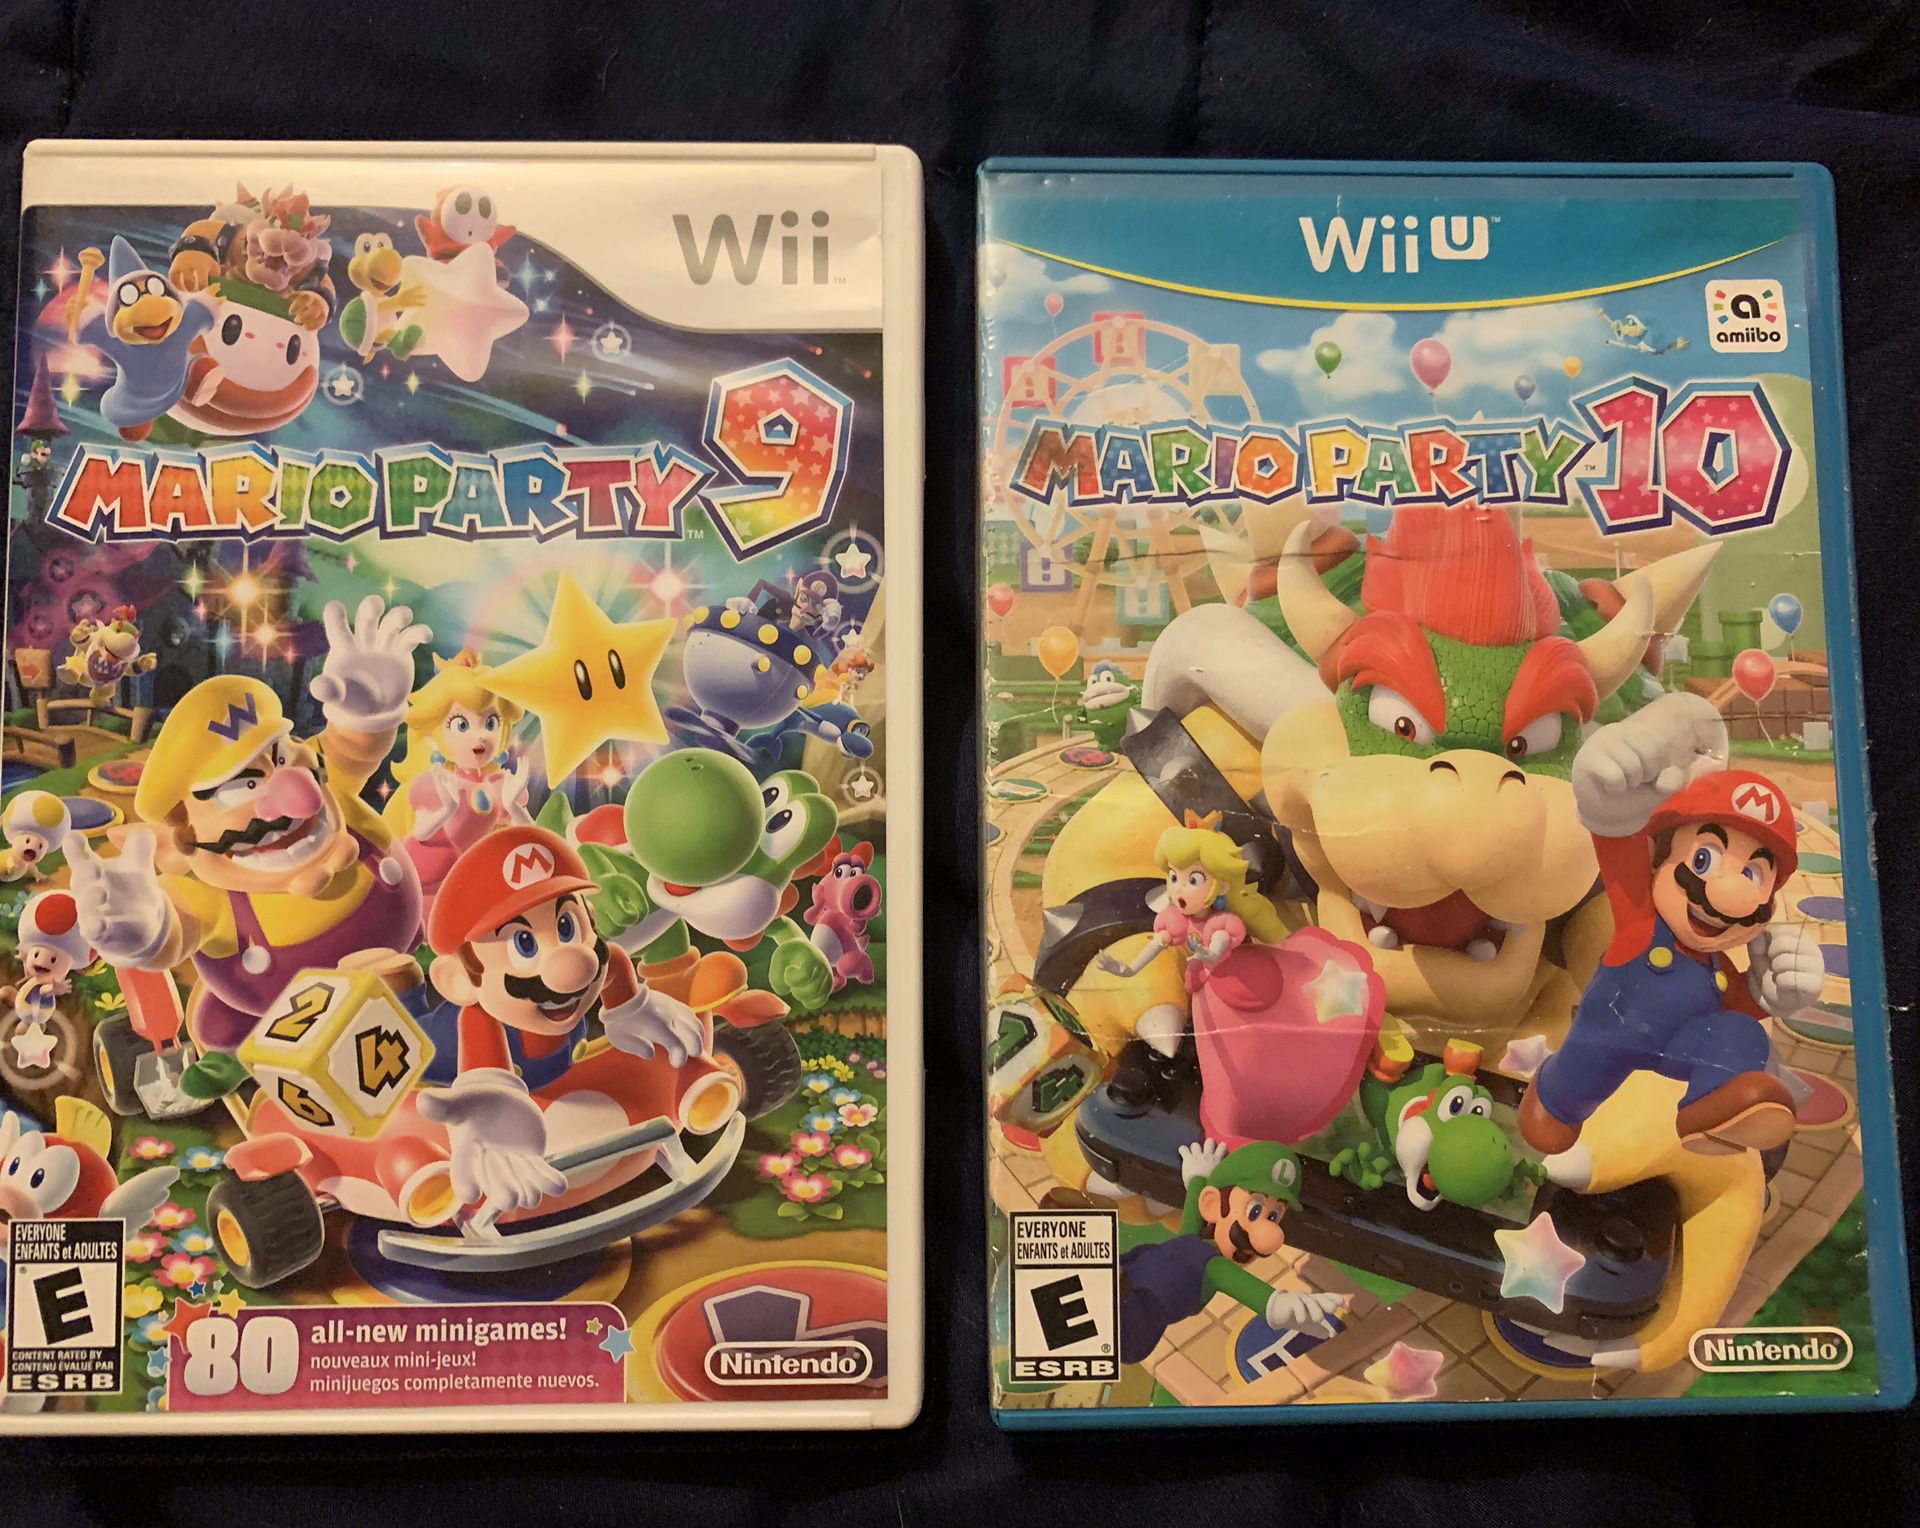 3 Wii and Wii U Games & 1 Mystery DS or Wii Game included